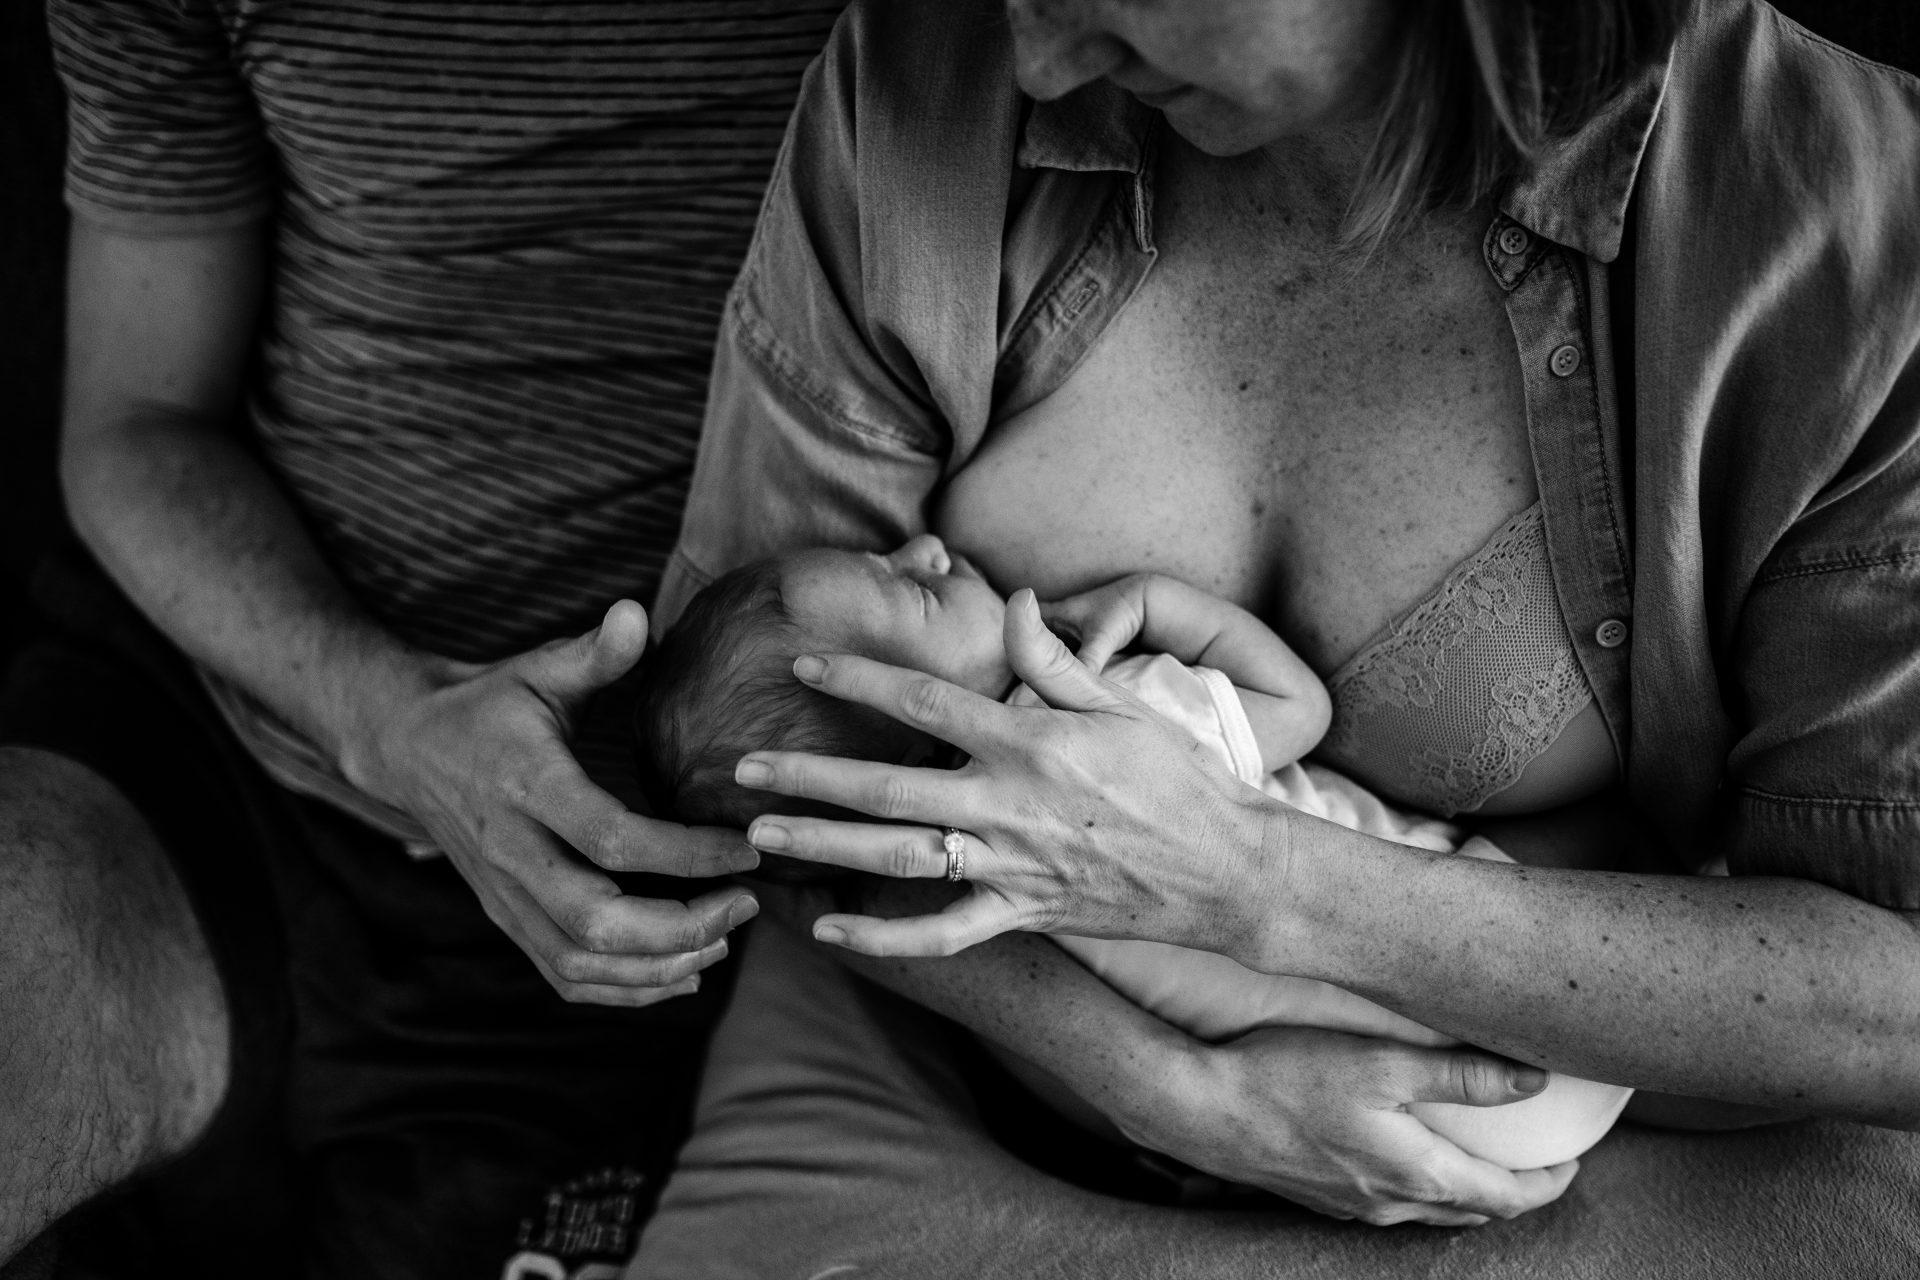 newborn latching her mom's breast, while being caressed by both her parents. Black and white picture.